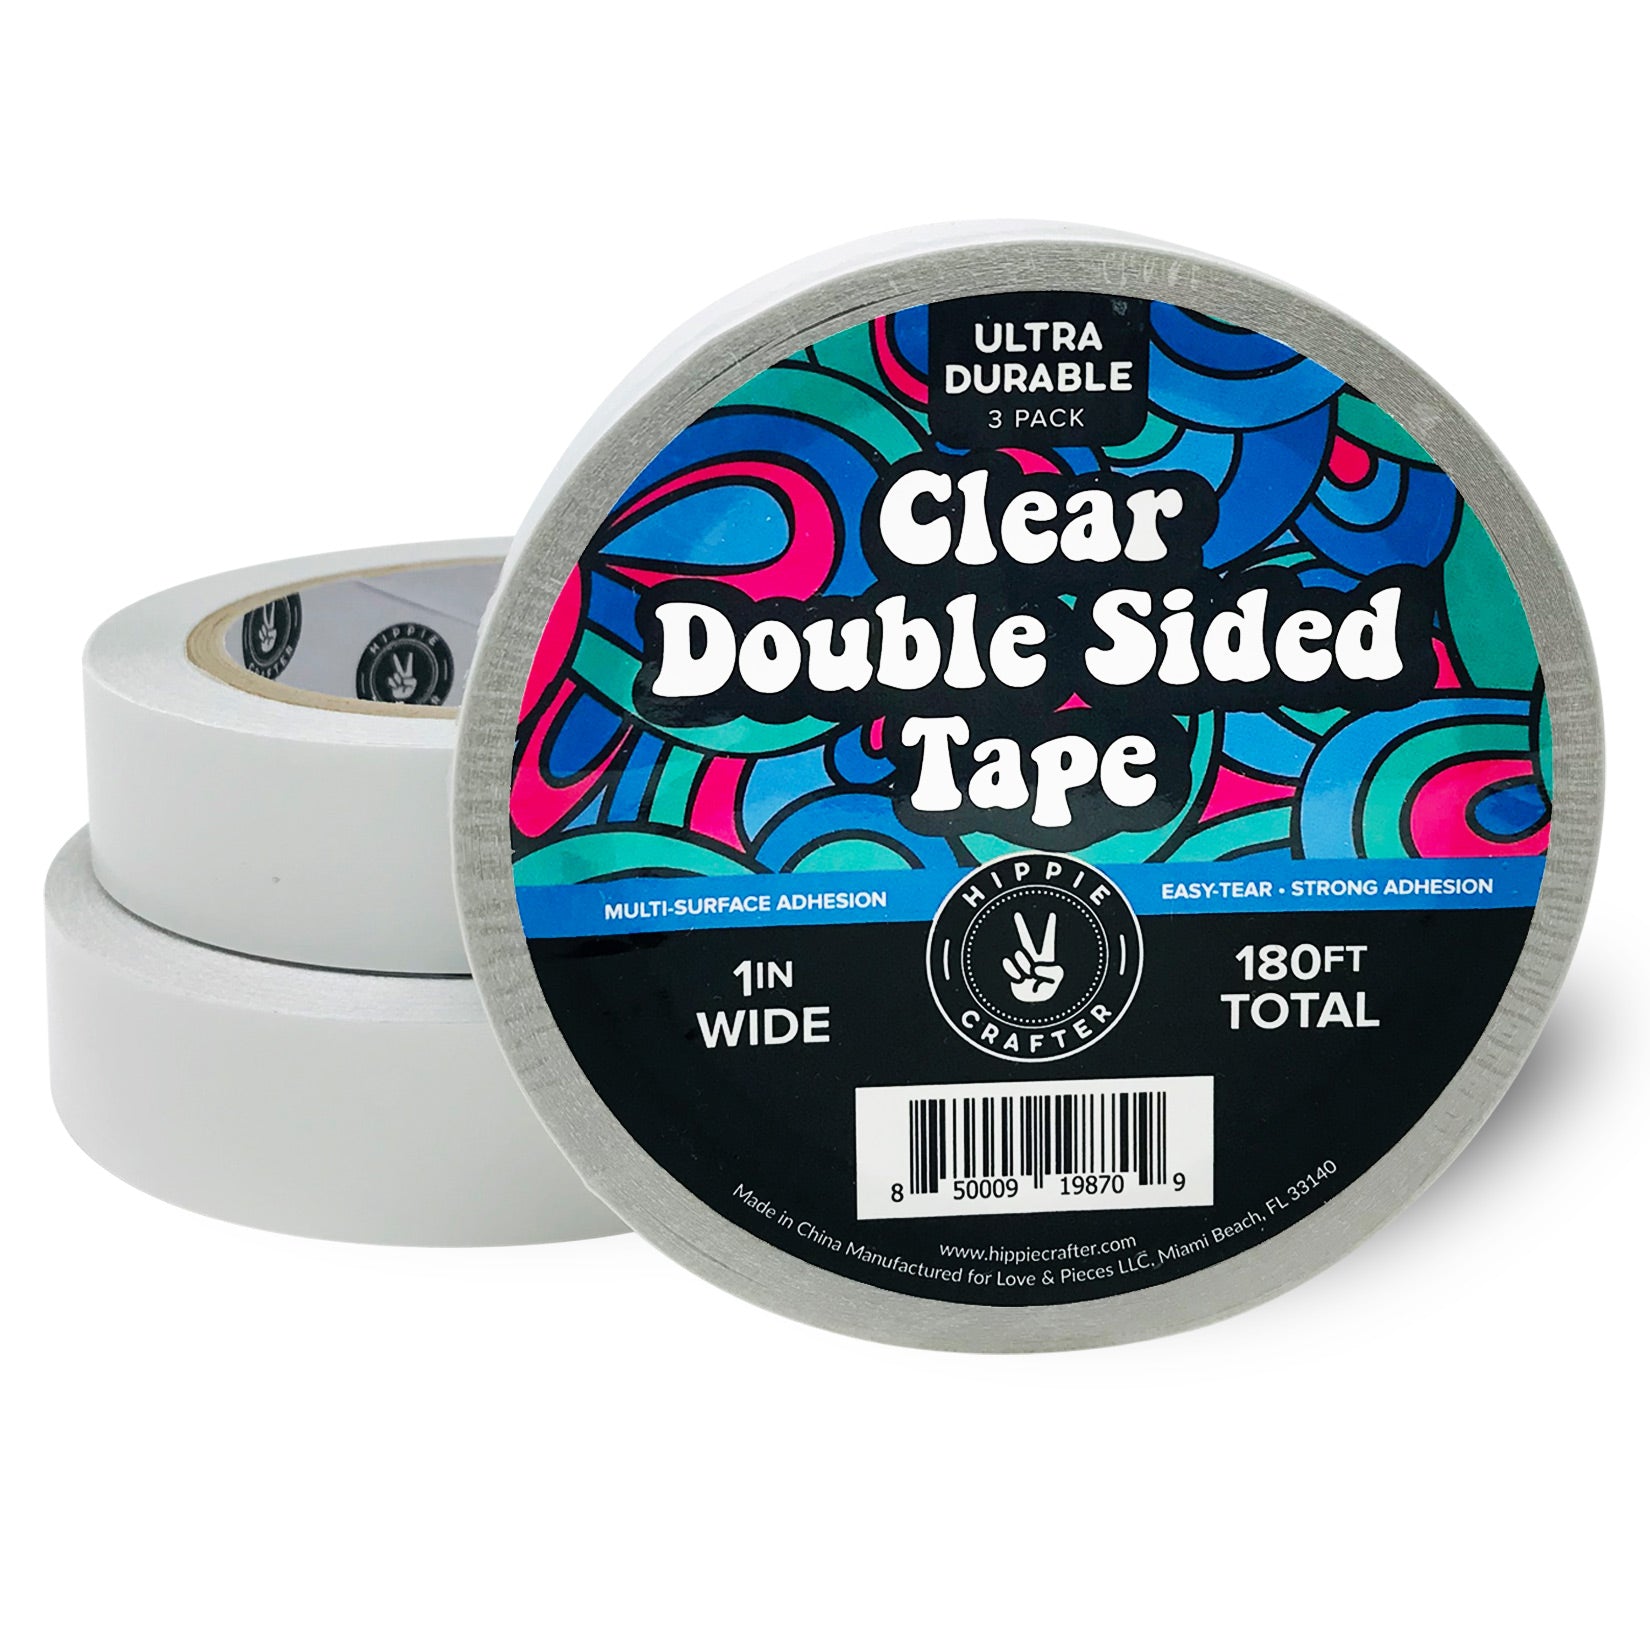 Hardware Tape - 3Pk Clear Double Sided Tape 1"